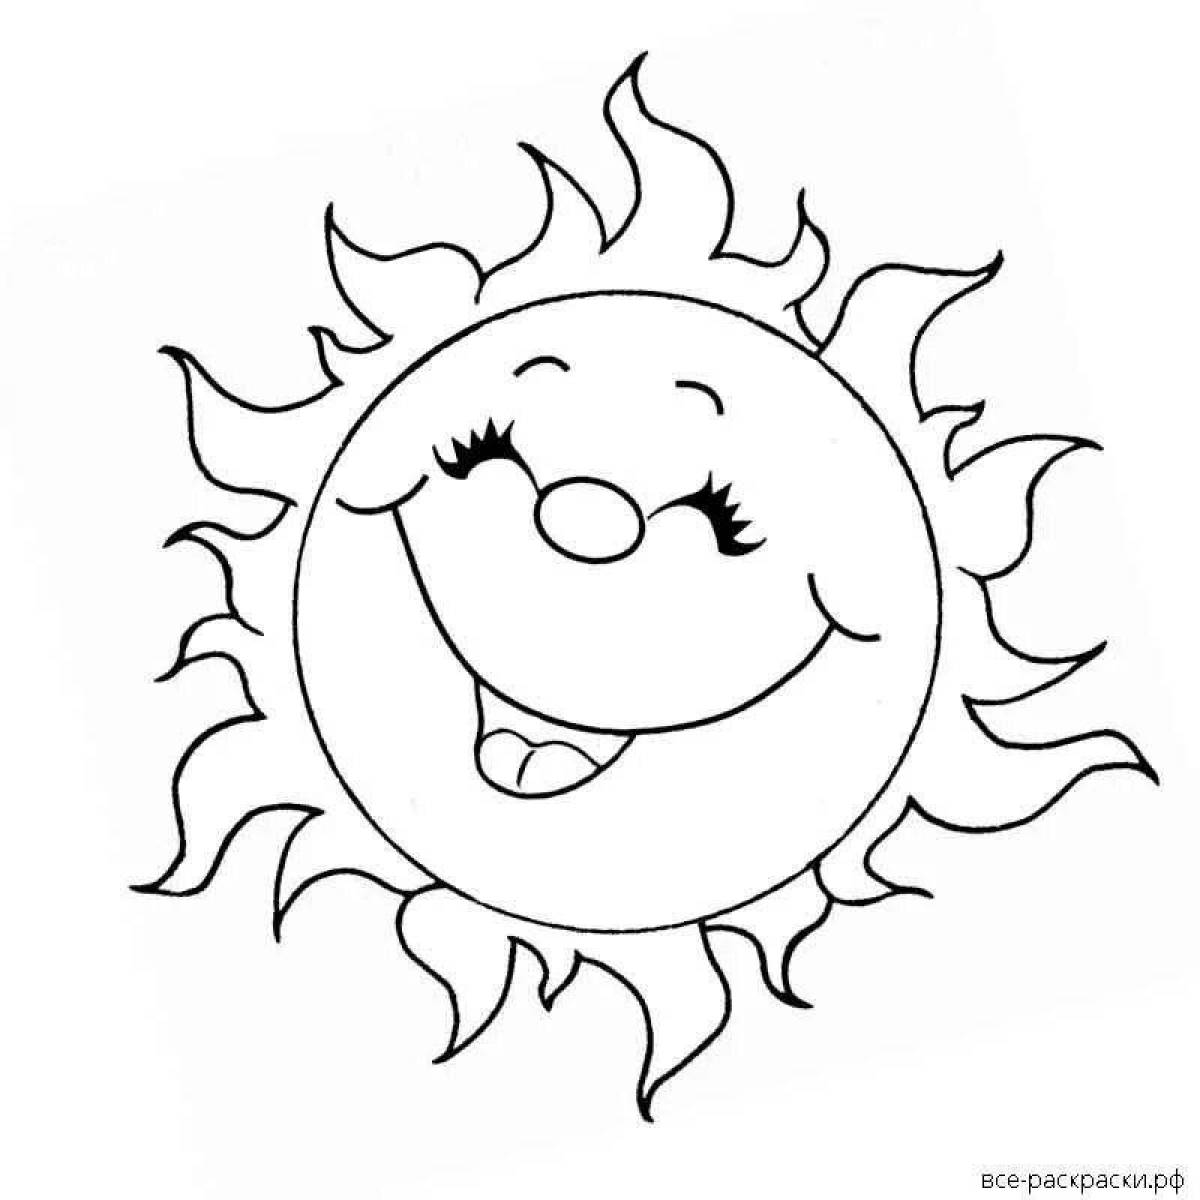 Great sun coloring picture for kids